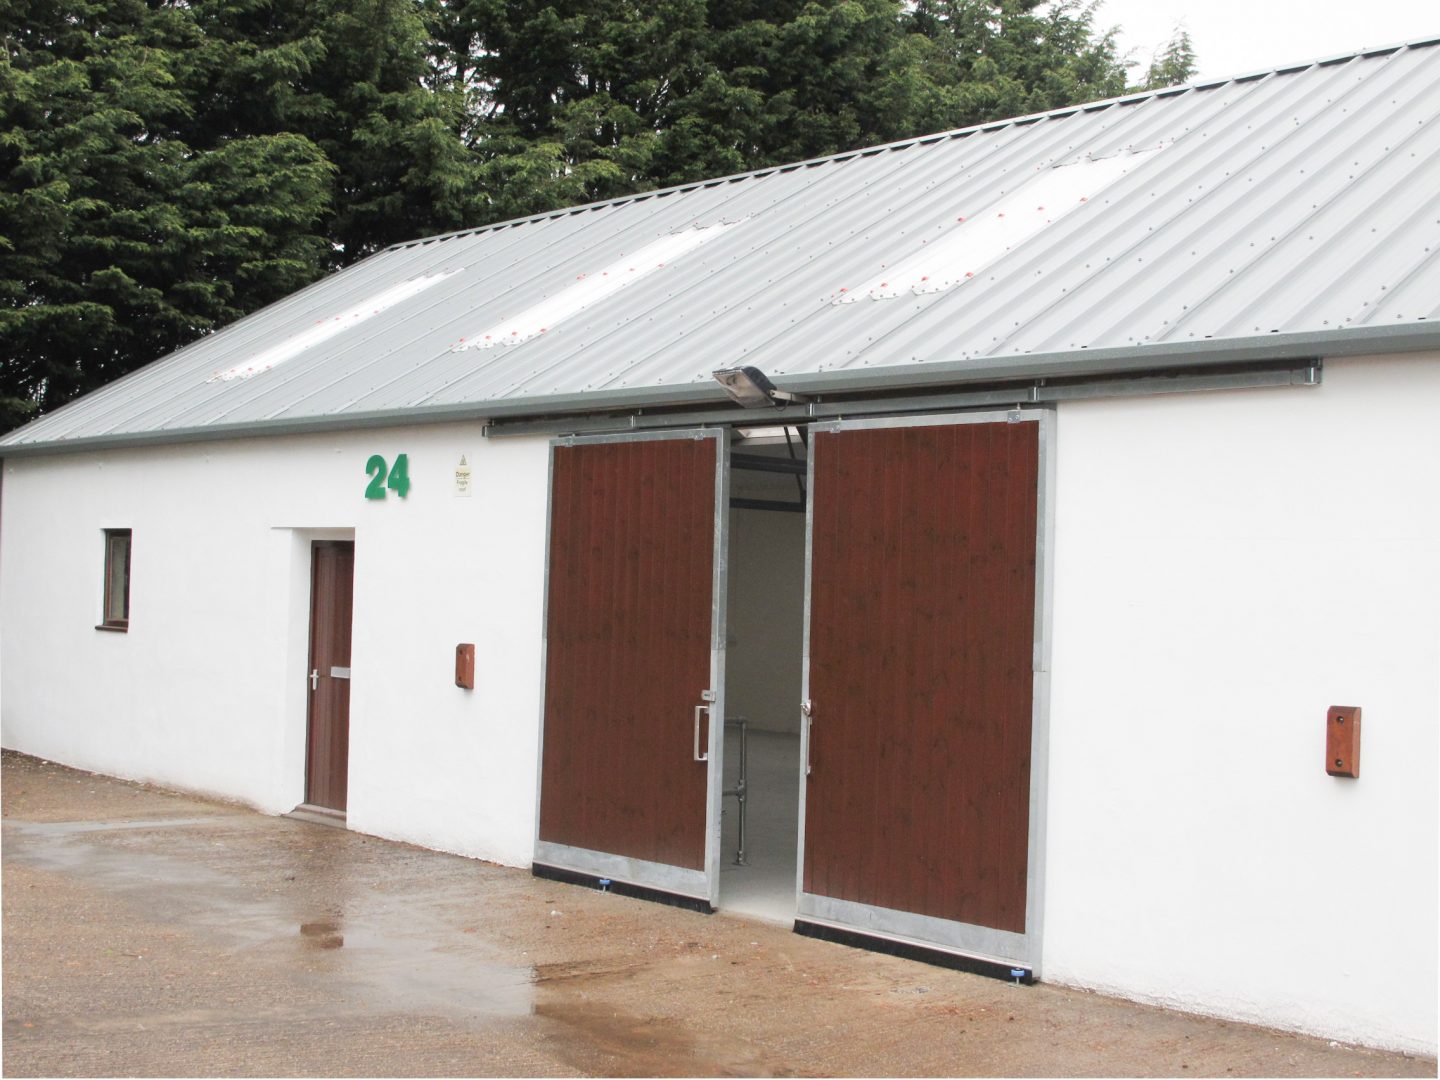 Units 24 & 25 Skirsgill Business Park, Penrith